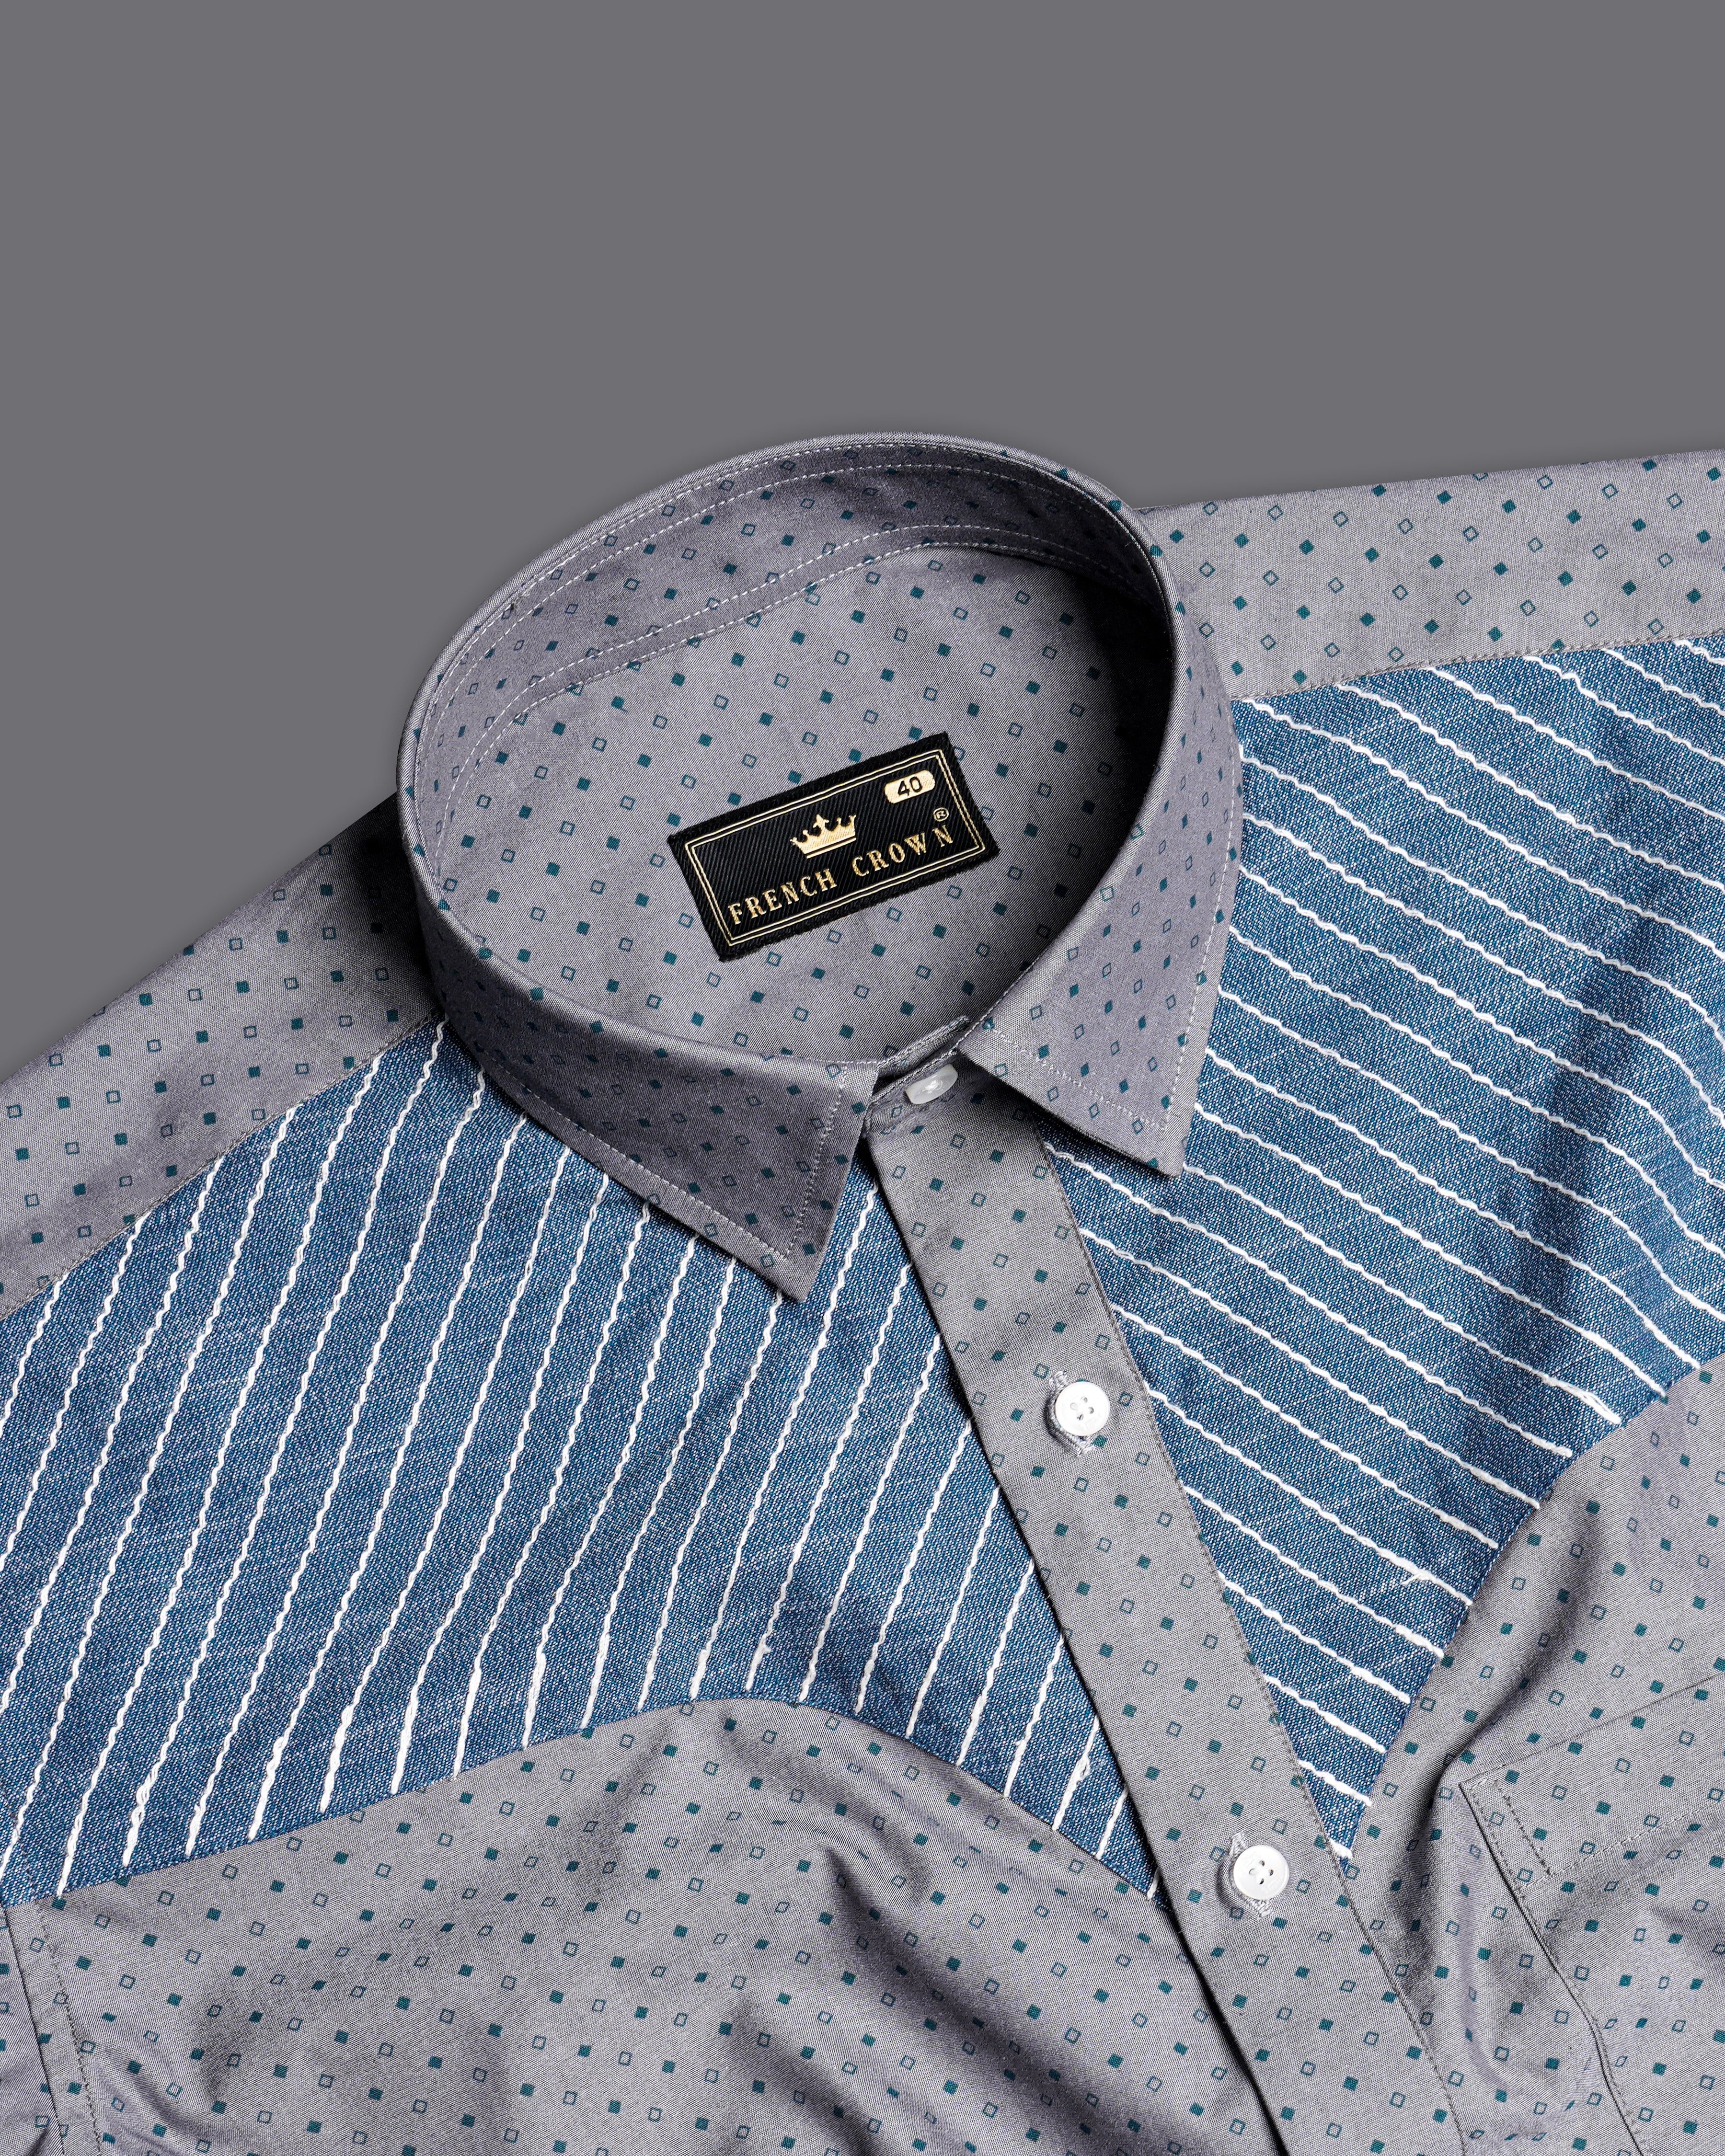 Mountain Gray with Plantation Blue Patchwork Premium Cotton Designer Shirt 9865-P318-38, 9865-P318-H-38, 9865-P318-39, 9865-P318-H-39, 9865-P318-40, 9865-P318-H-40, 9865-P318-42, 9865-P318-H-42, 9865-P318-44, 9865-P318-H-44, 9865-P318-46, 9865-P318-H-46, 9865-P318-48, 9865-P318-H-48, 9865-P318-50, 9865-P318-H-50, 9865-P318-52, 9865-P318-H-52